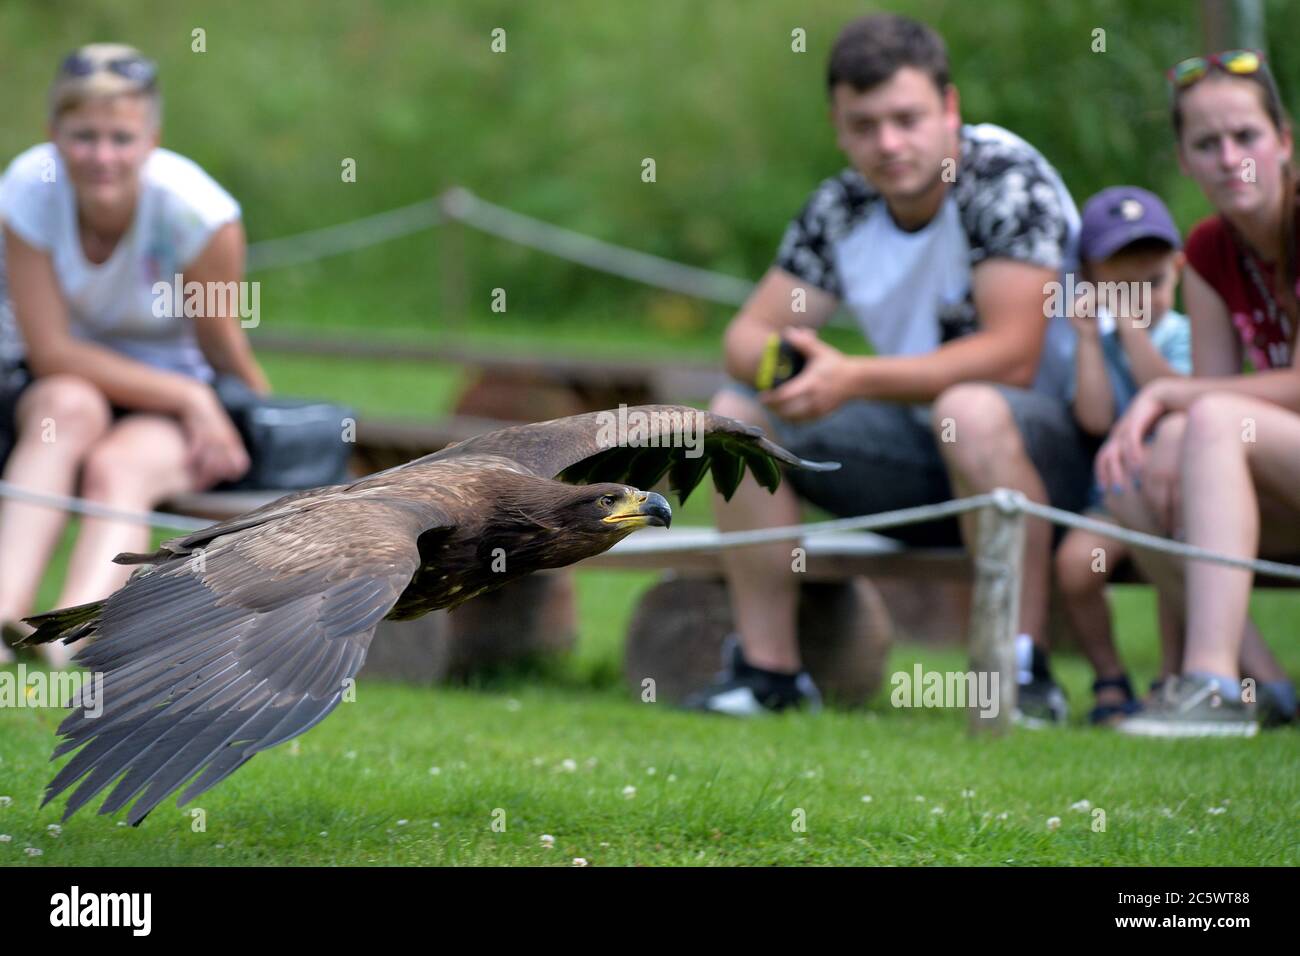 Jihlava, Czech Republic. 5th July, 2020. Falconer Eduard Skaloud presents birds of prey to zoo visitors. Located at the Jihlava Zoo, you can come face to face with the magnificent bald eagle and beautiful owls. During the day you can experience one of the most exciting ''Birds of Prey'' displays in the Czech Repubic. Credit: Slavek Ruta/ZUMA Wire/Alamy Live News Stock Photo